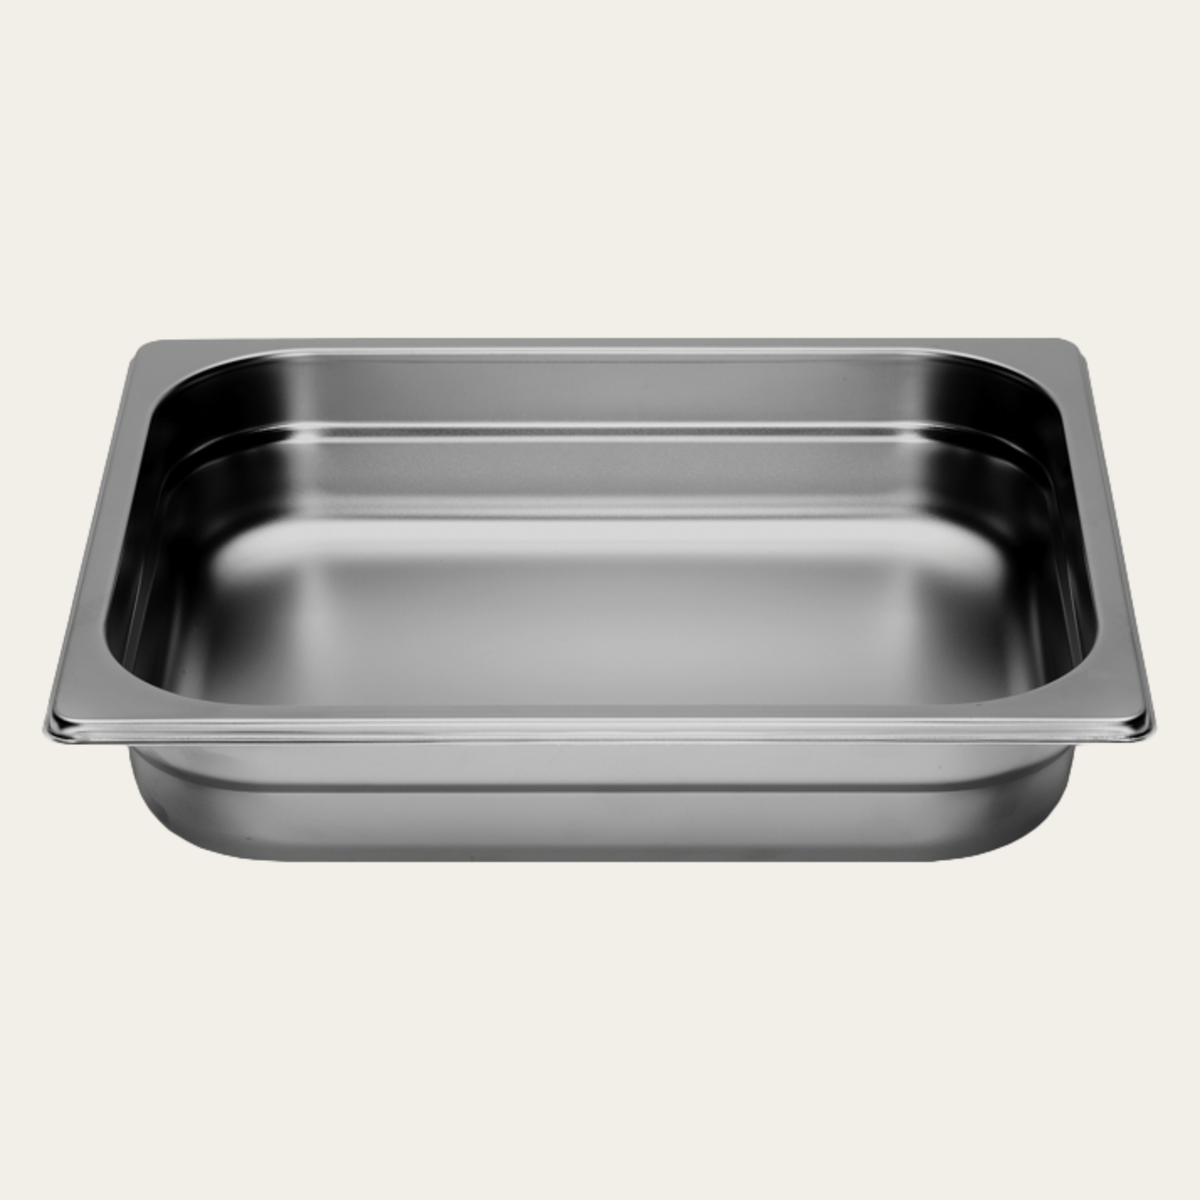 Unperforated cooking tray (1/2 GN), height 65mm